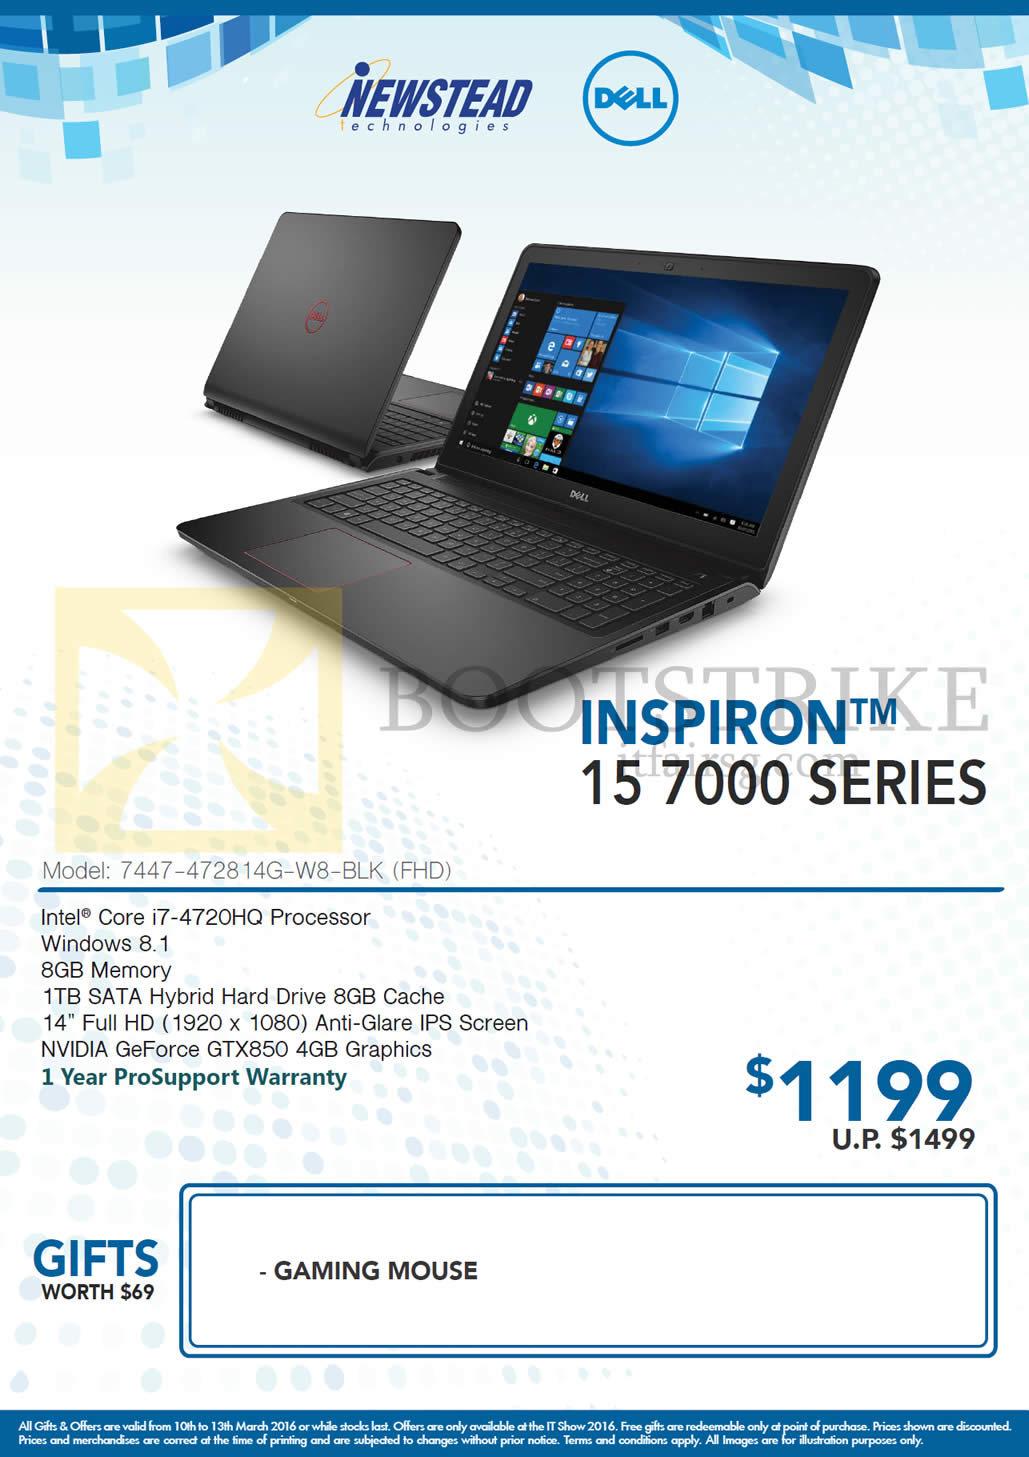 IT SHOW 2016 price list image brochure of Dell Newstead Notebook Inspiron 15 7000 Series